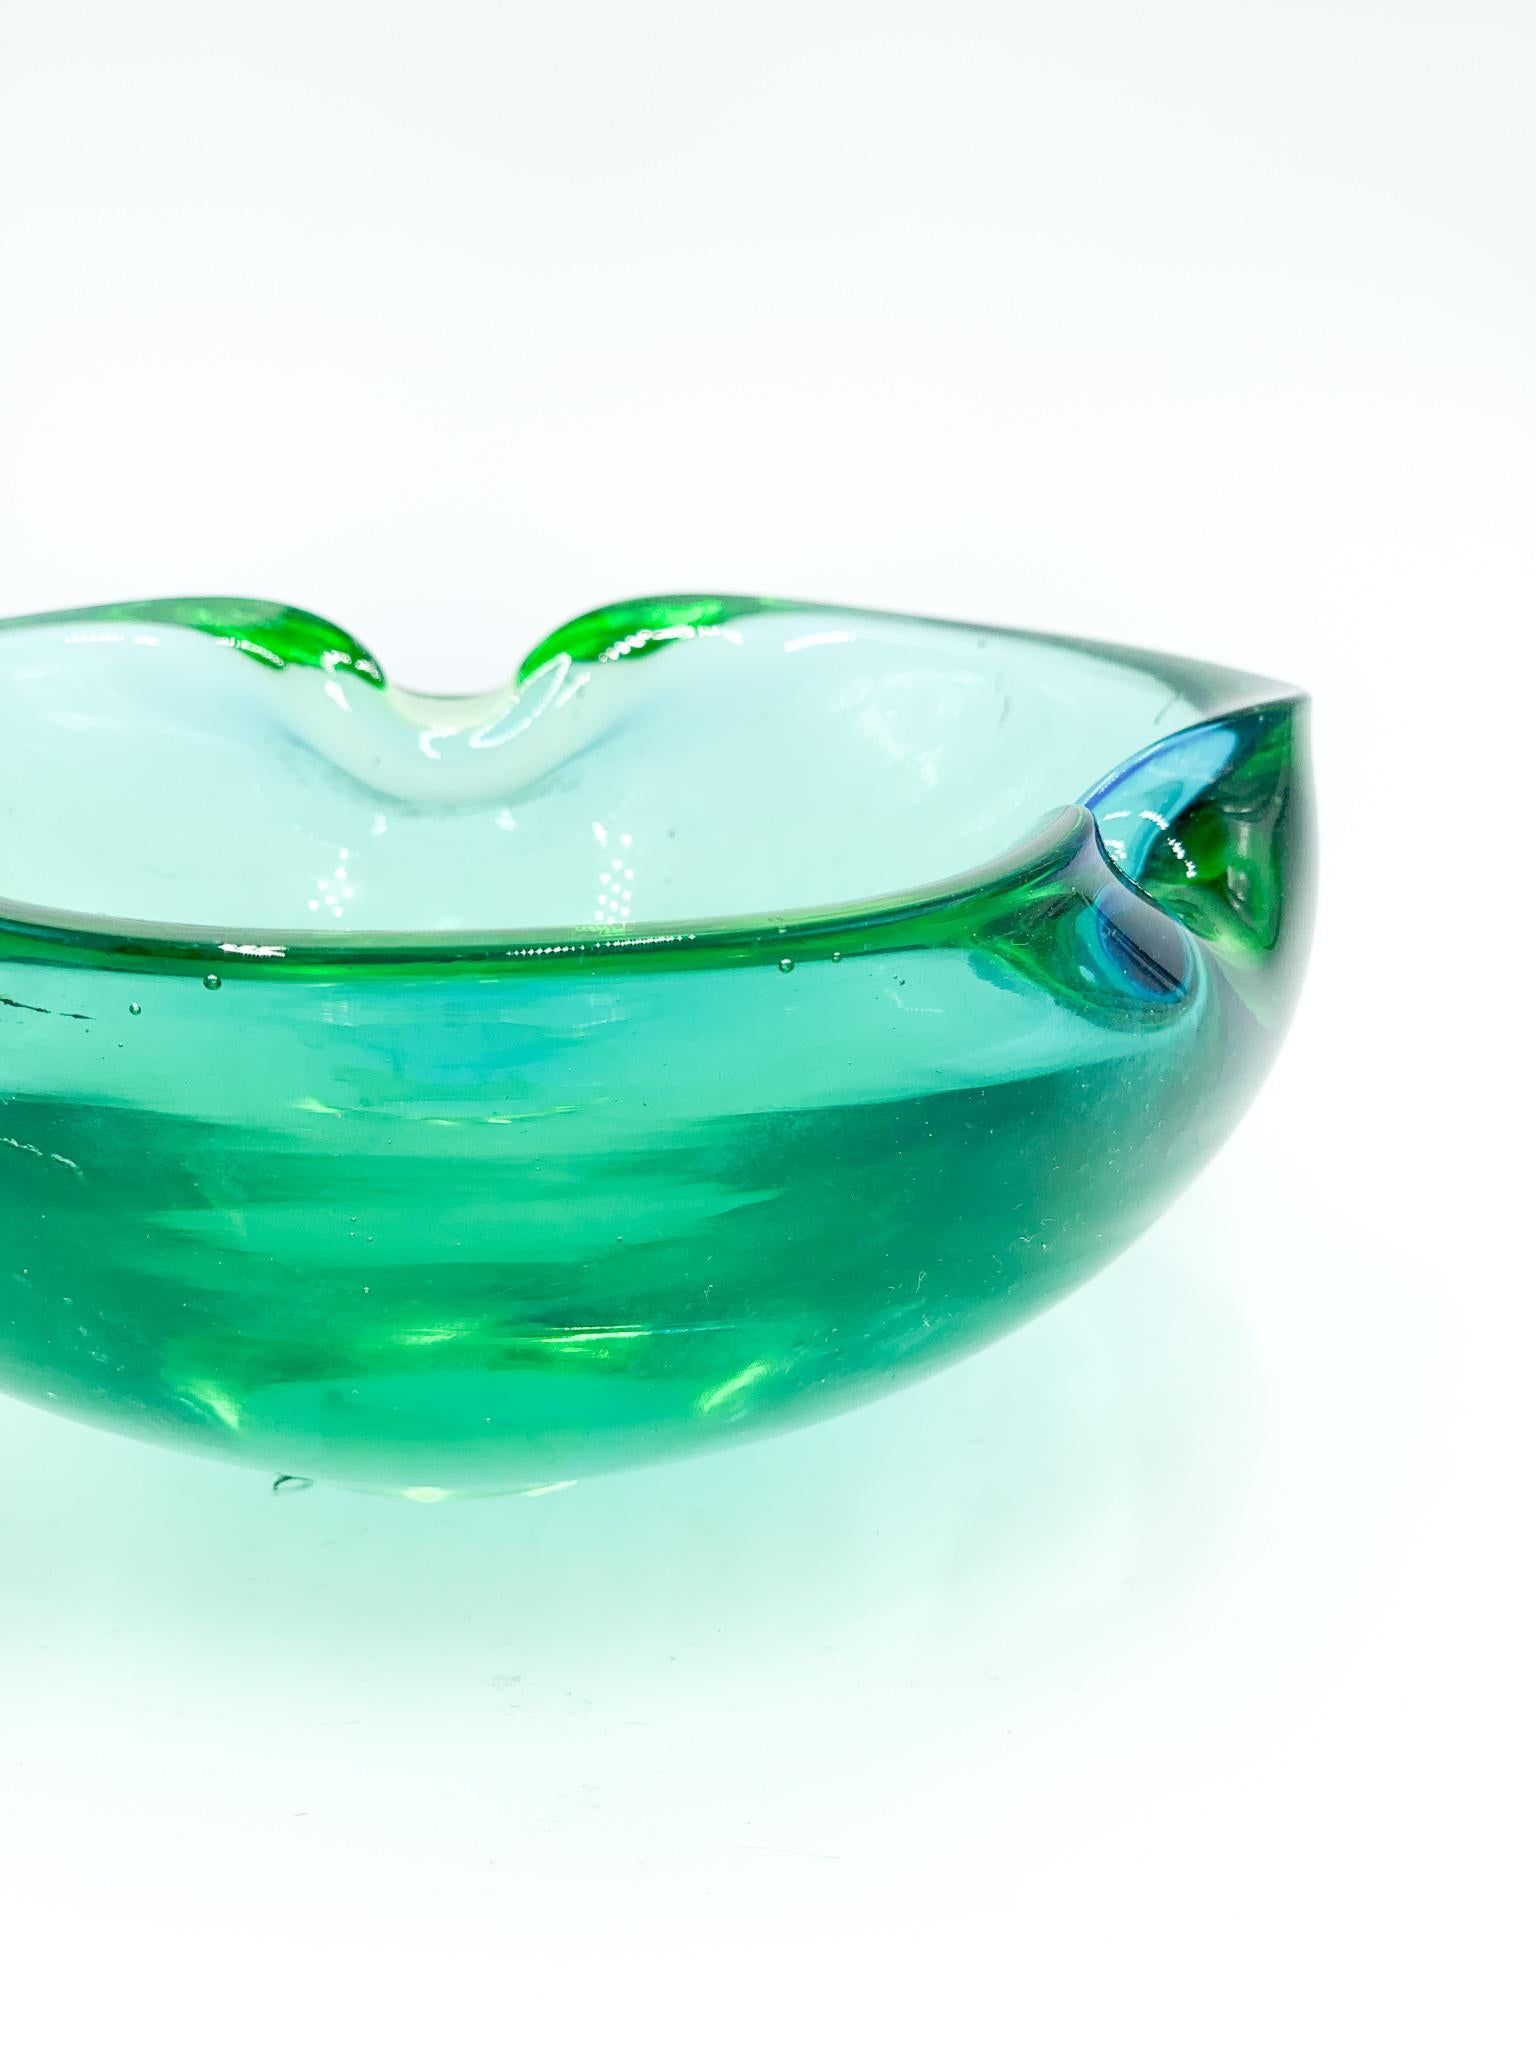 Green and Blue Murano glass ashtray, whose realisation is attributed to Flavio Poli and made in the 1960s

The ashtray has been realised with a particular color infusing technique: green with blu shades according to different perspectives.